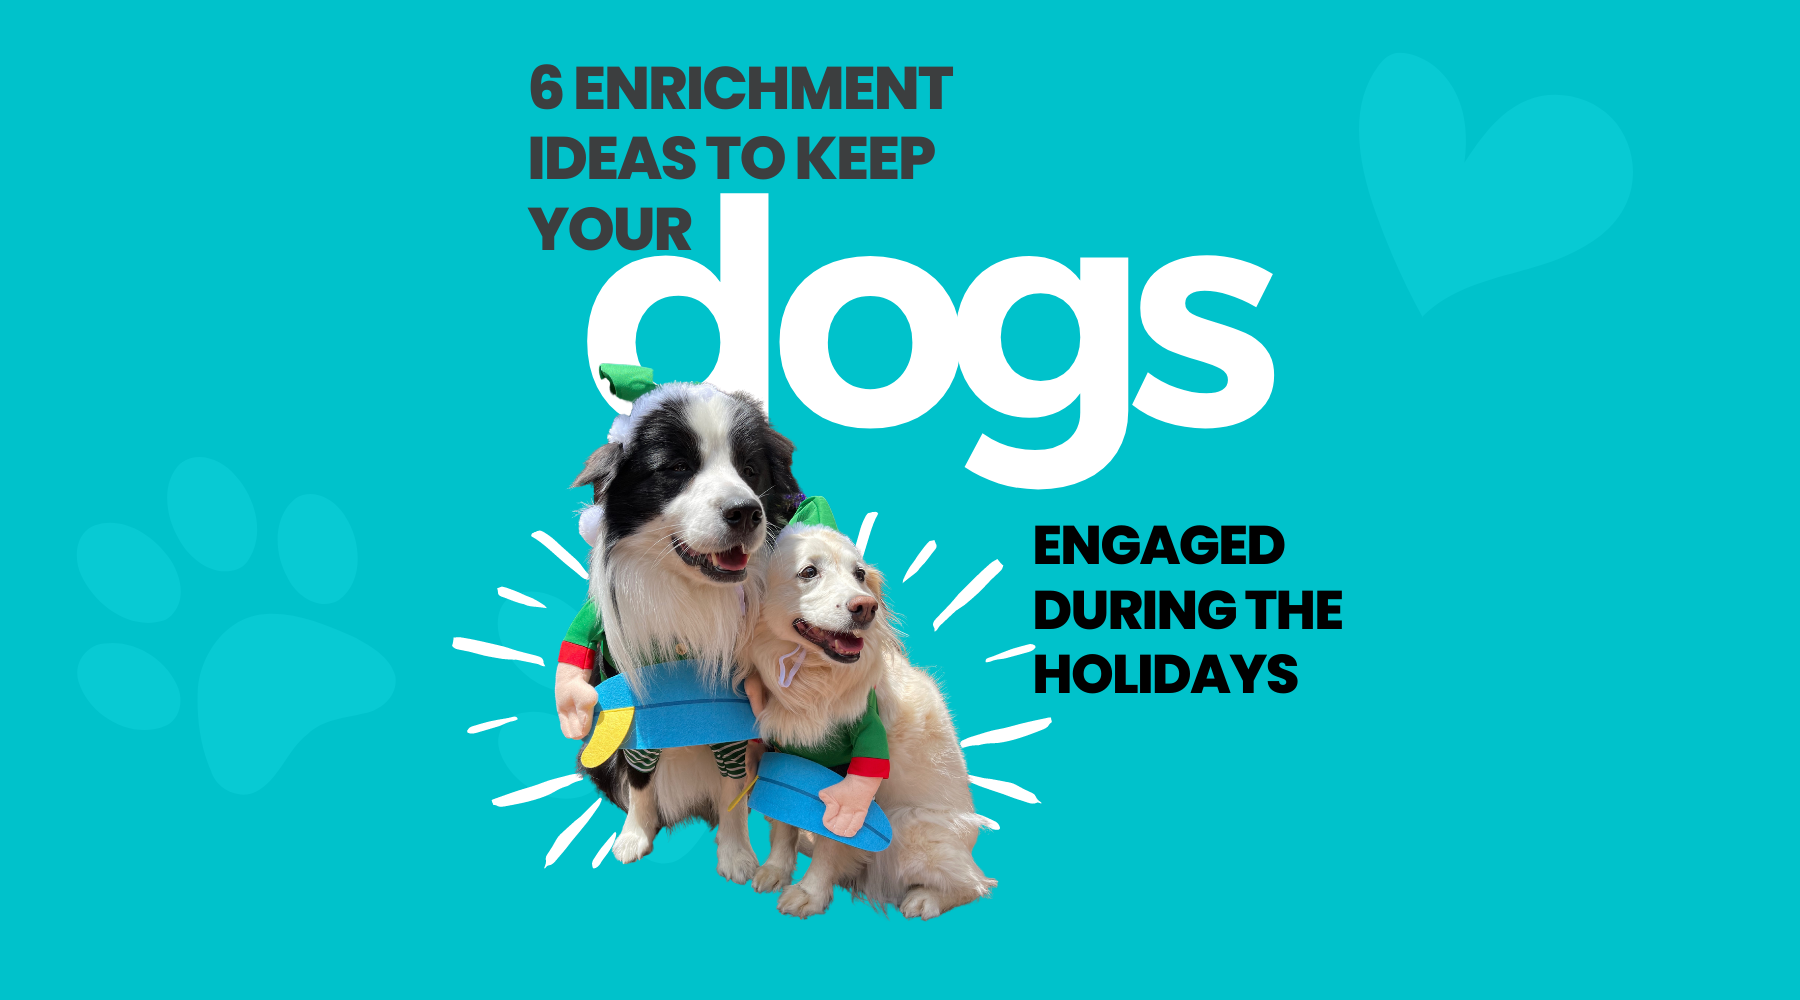 6 enrichment ideas to keep your dog entertained and engaged during the holidays!